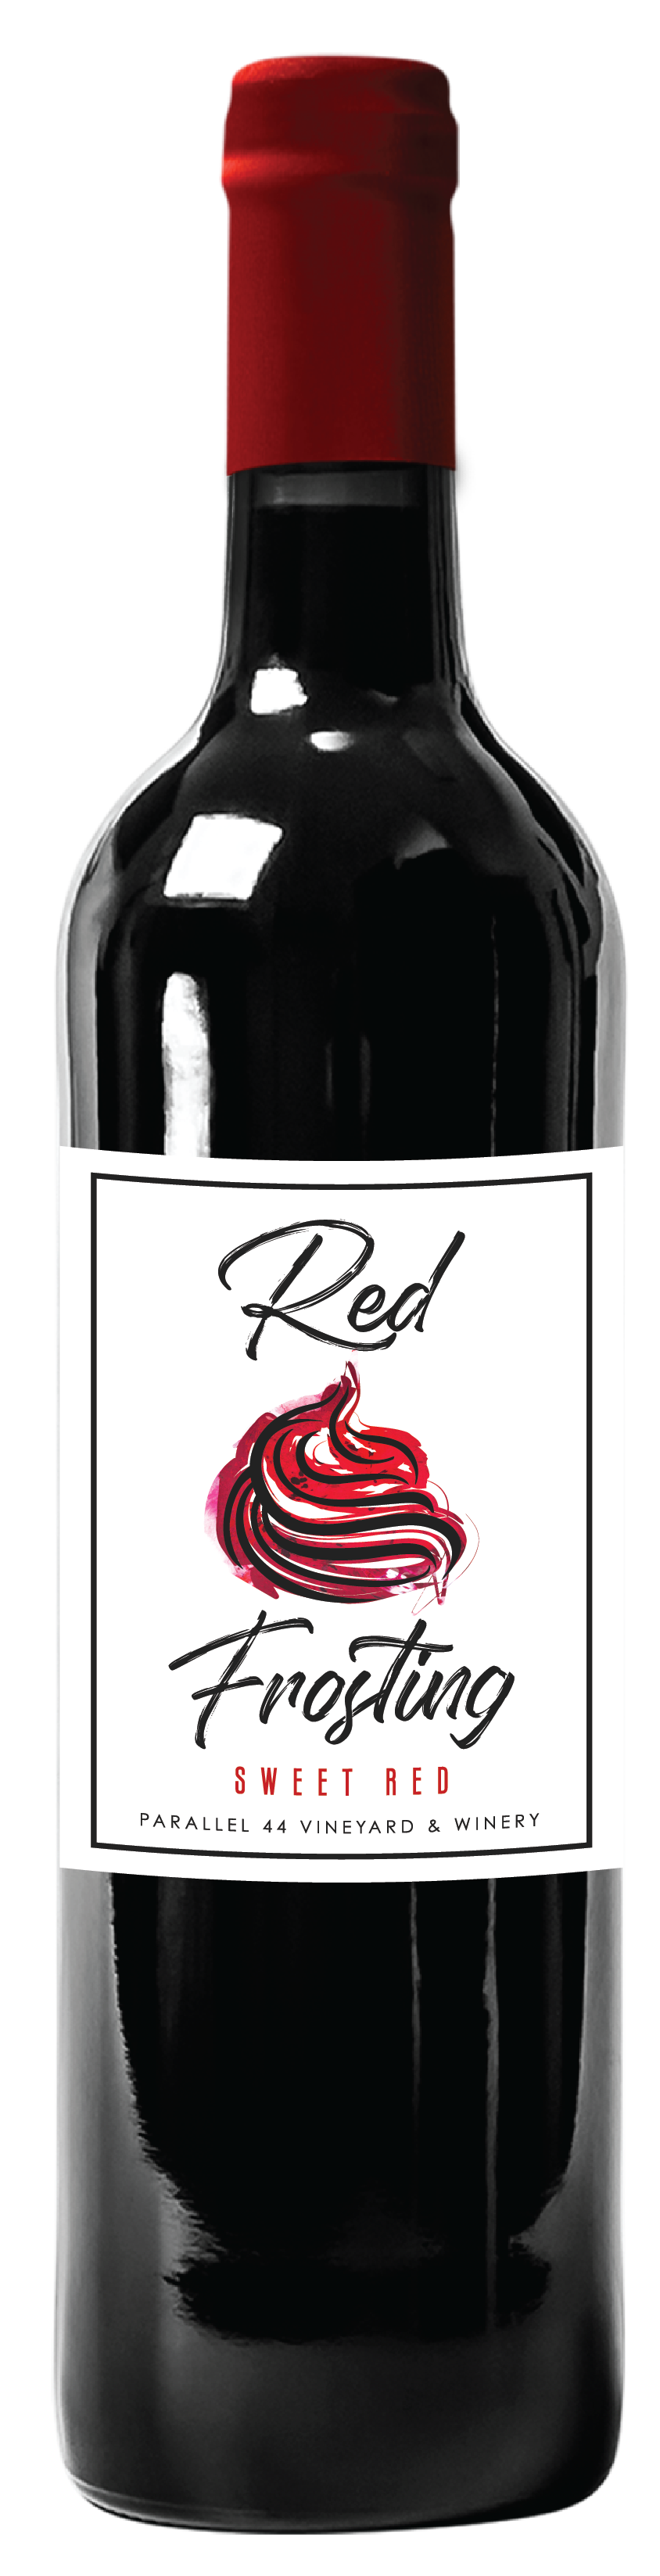 Wines Online, Red & White Wines